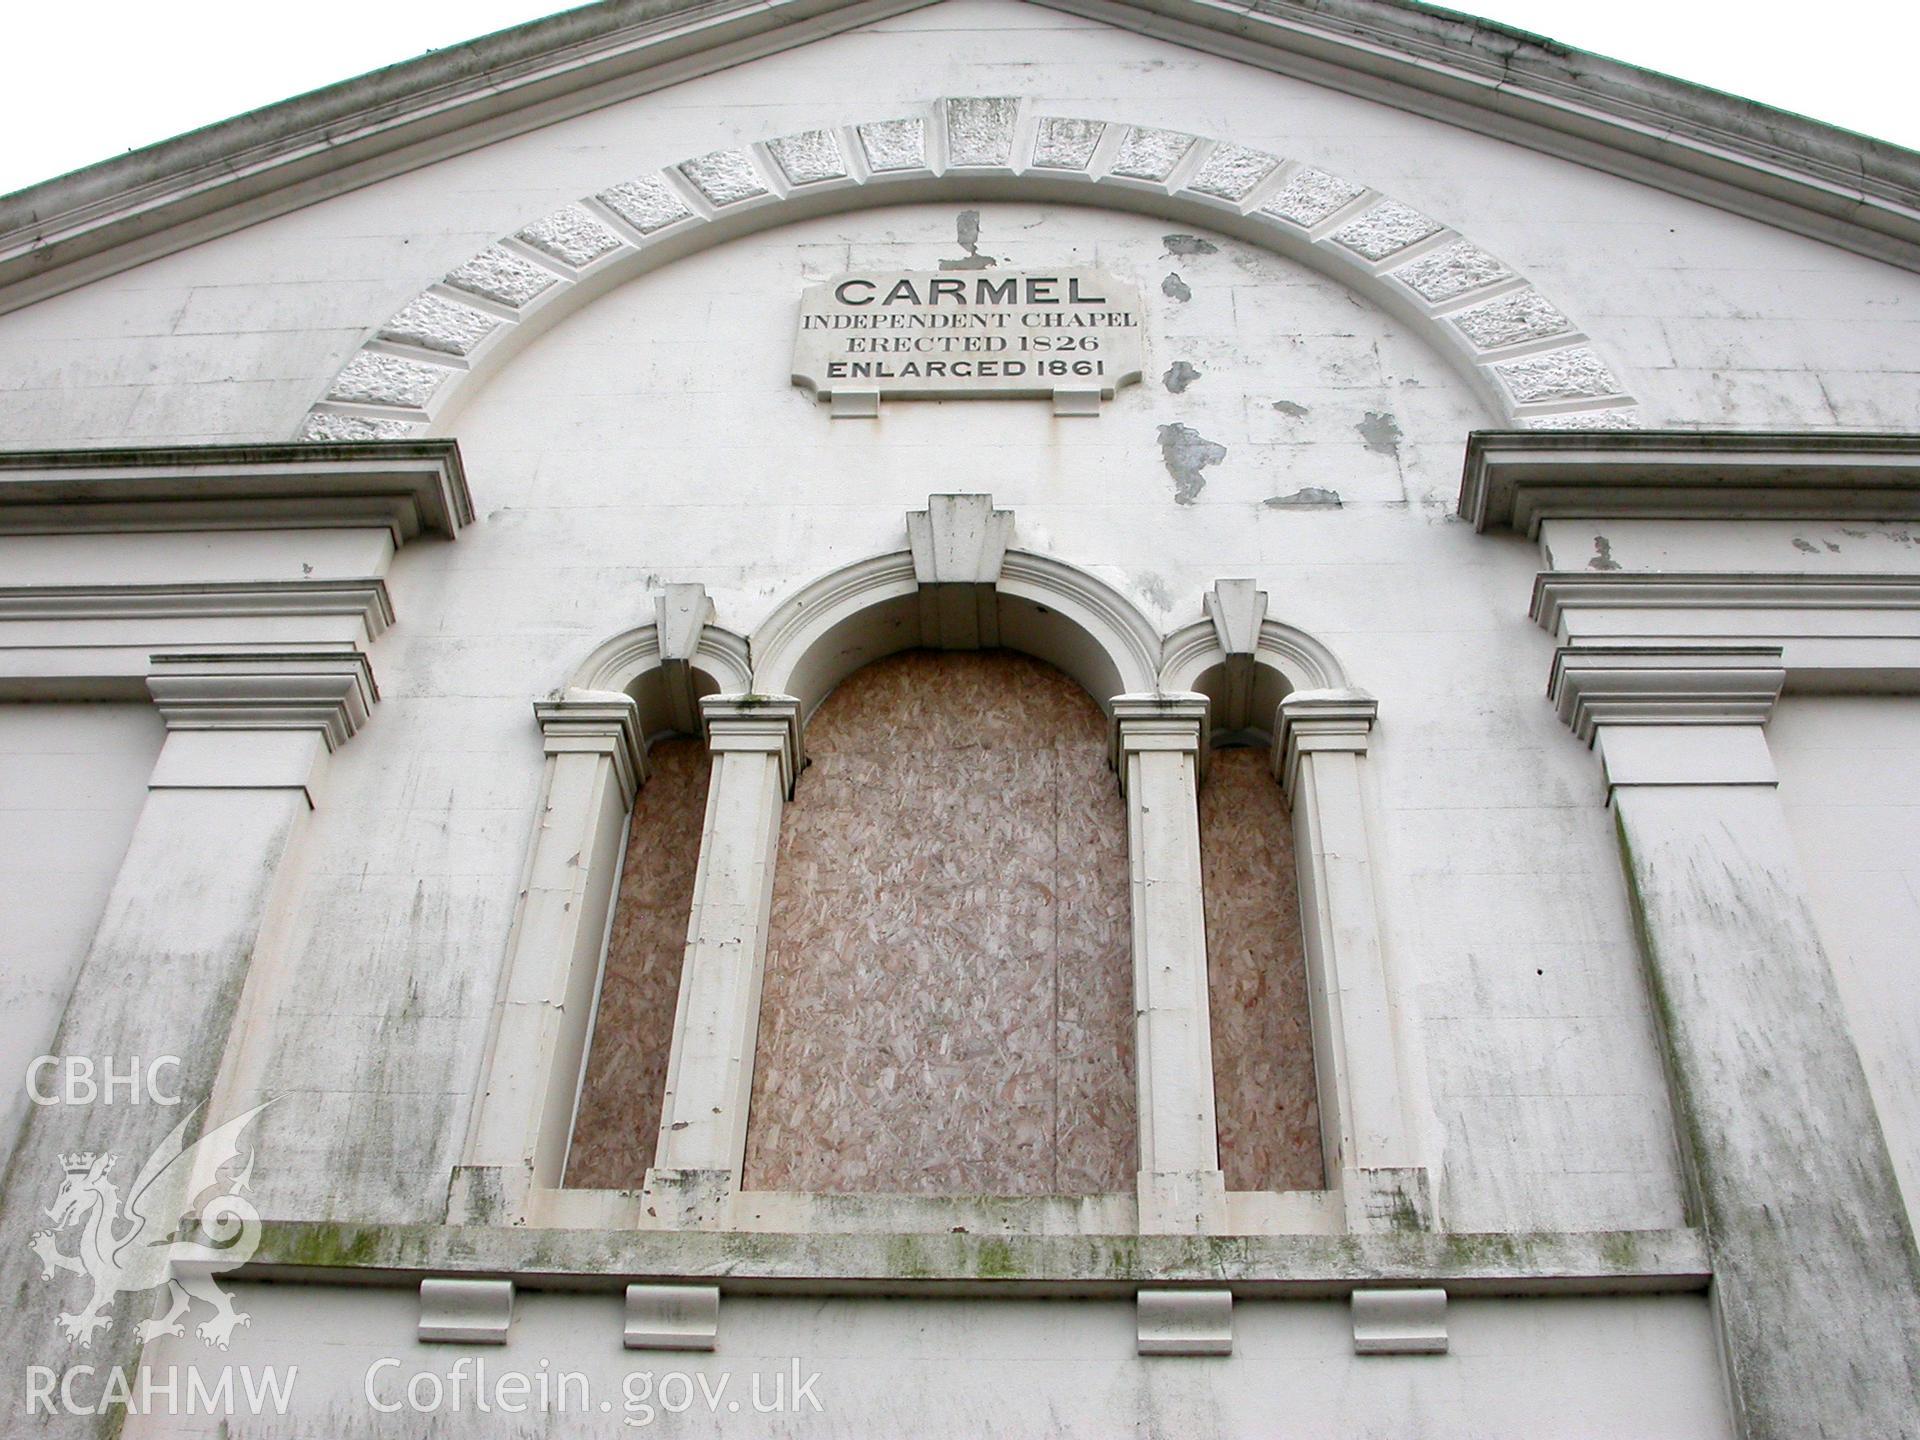 Arched Venetian window on the upper part of the chapel front